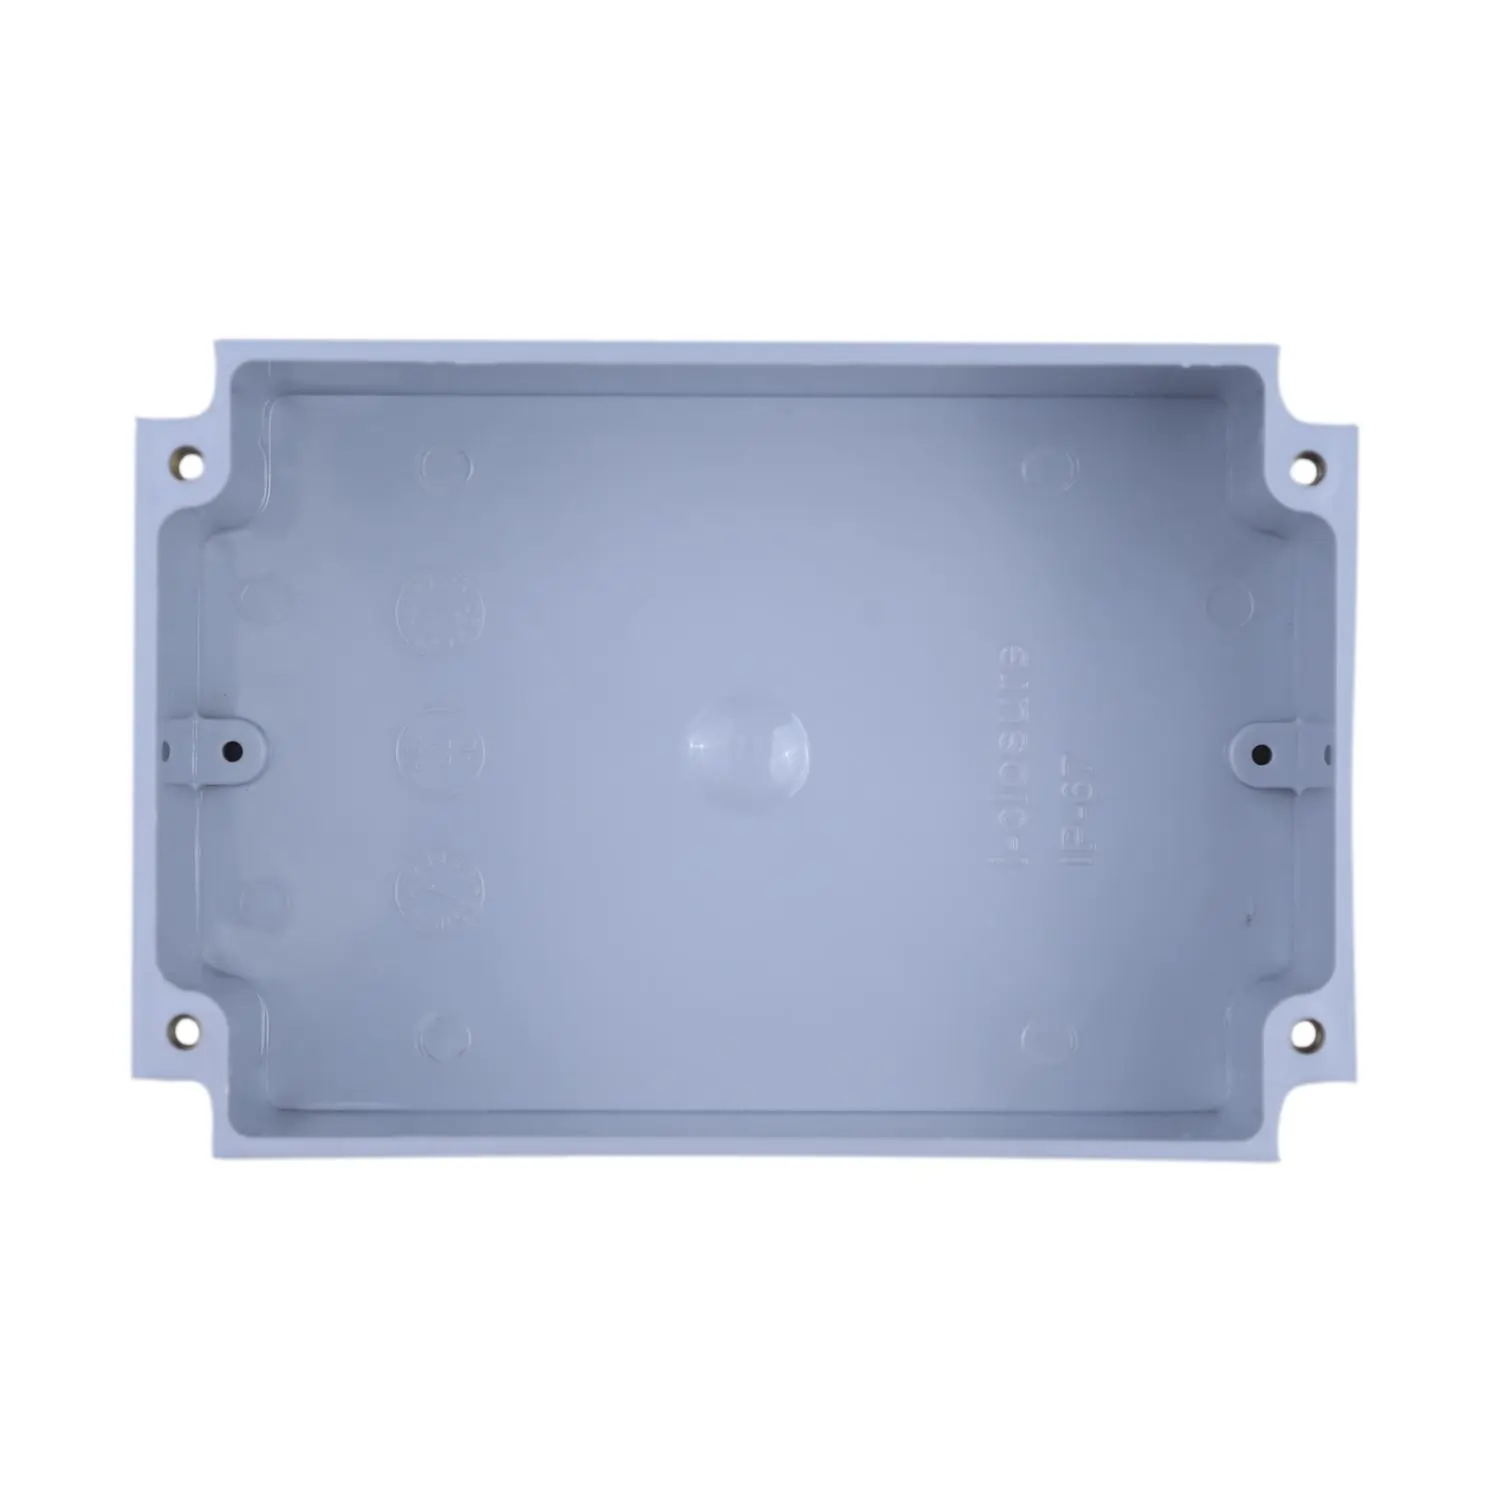 Outdoor Large Project Junction Box Waterproof Plastic Electrical Enclosure  Grey